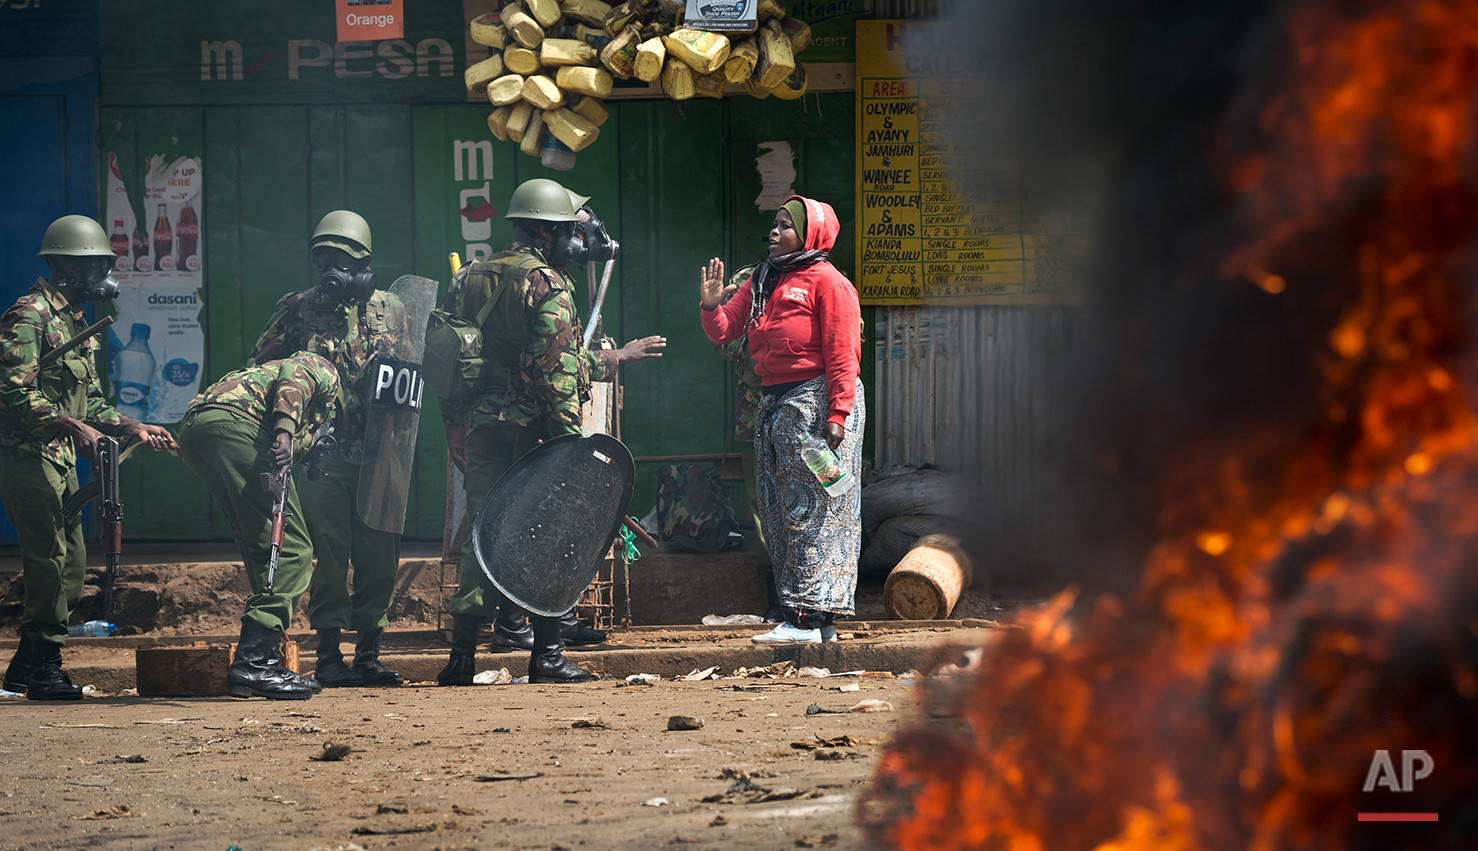  A woman resident talks with police as they engage in running battles between police firing tear gas and protesters throwing rocks, in the Kibera slum of Nairobi, Kenya Monday, May 23, 2016. Kenya's police shot, beat and tear gassed opposition demons